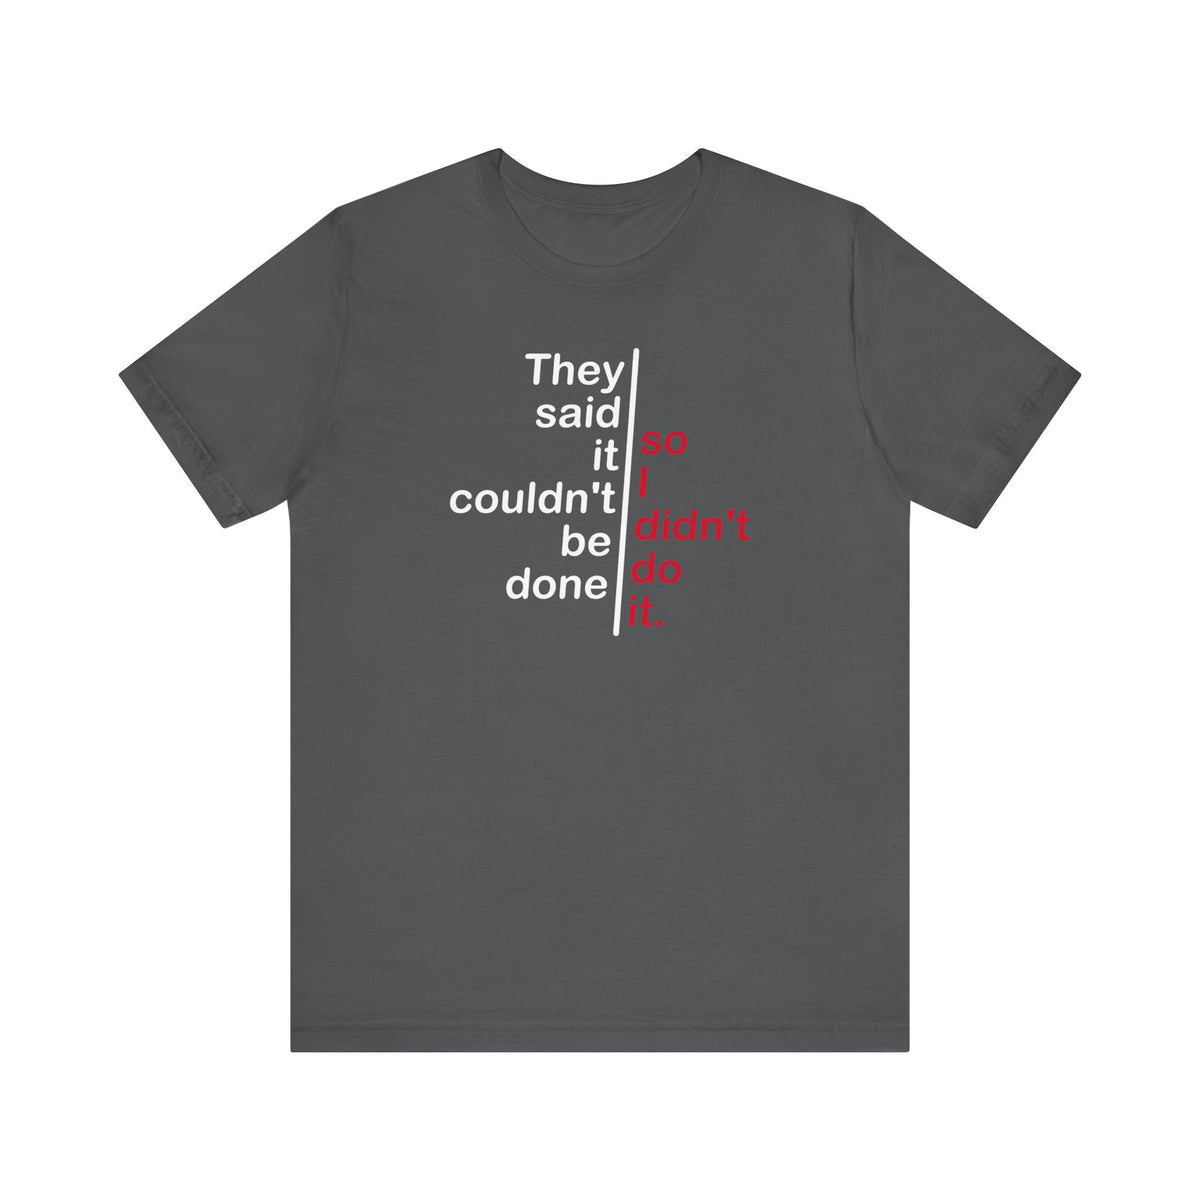 They Said It Couldn't Be Done - So I Didn't Do It. - Men's T-Shirt